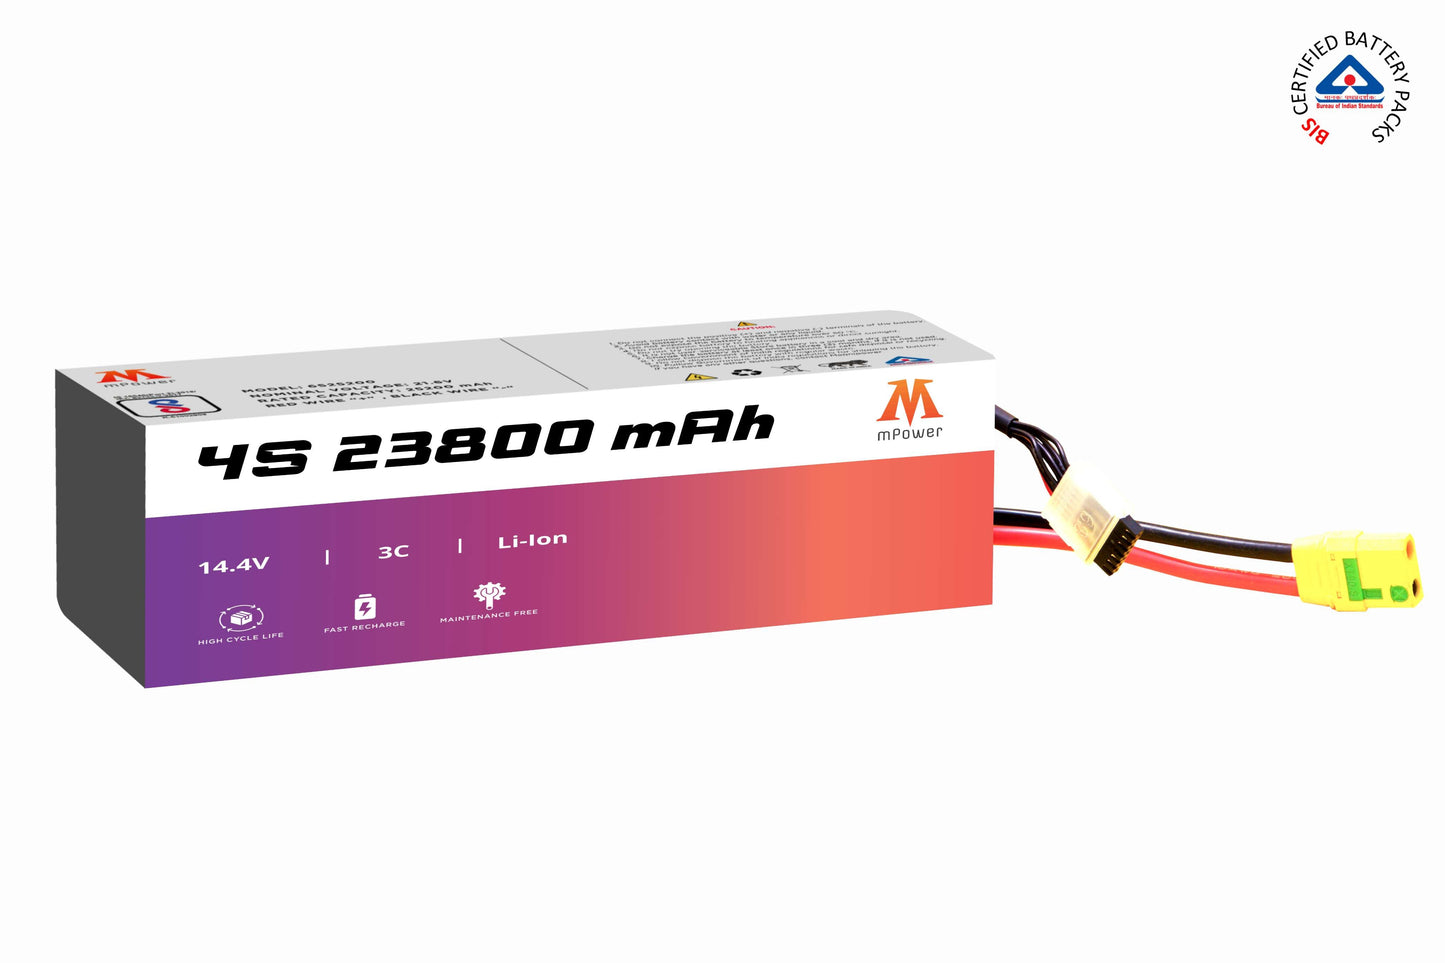 mPower 4S 23800mAh Lithium-Ion Battery for Surveillance Drones